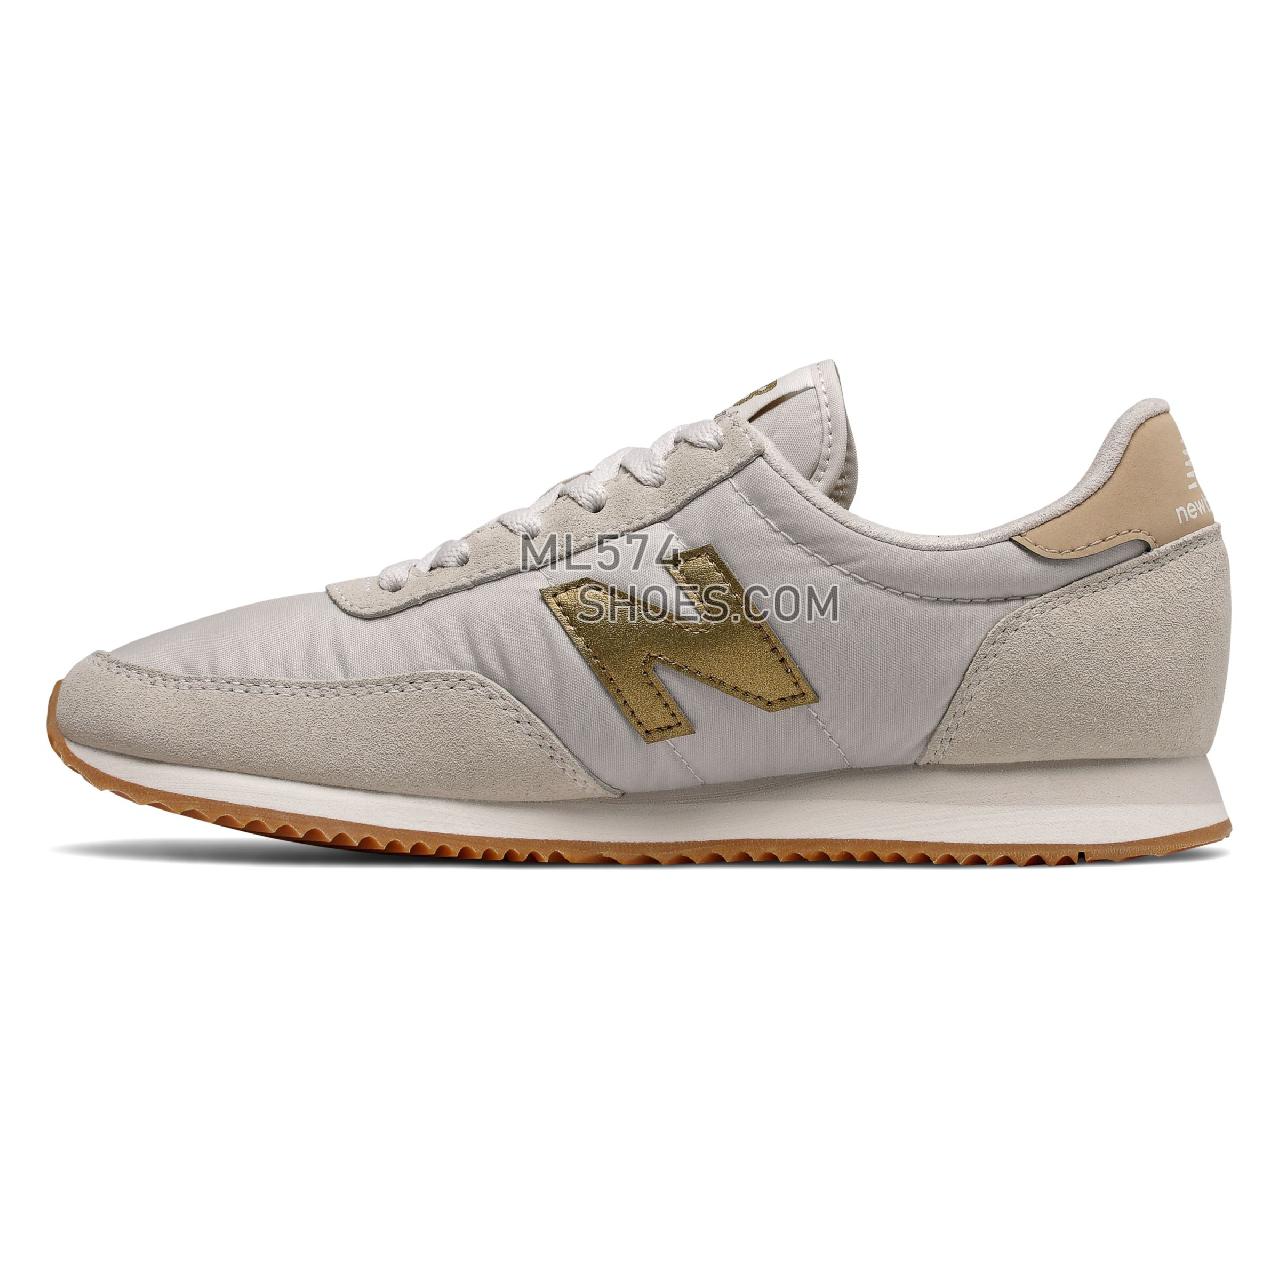 New Balance 720 - Women's Whats Trending - Sea Salt with Classic Gold - WL720AB